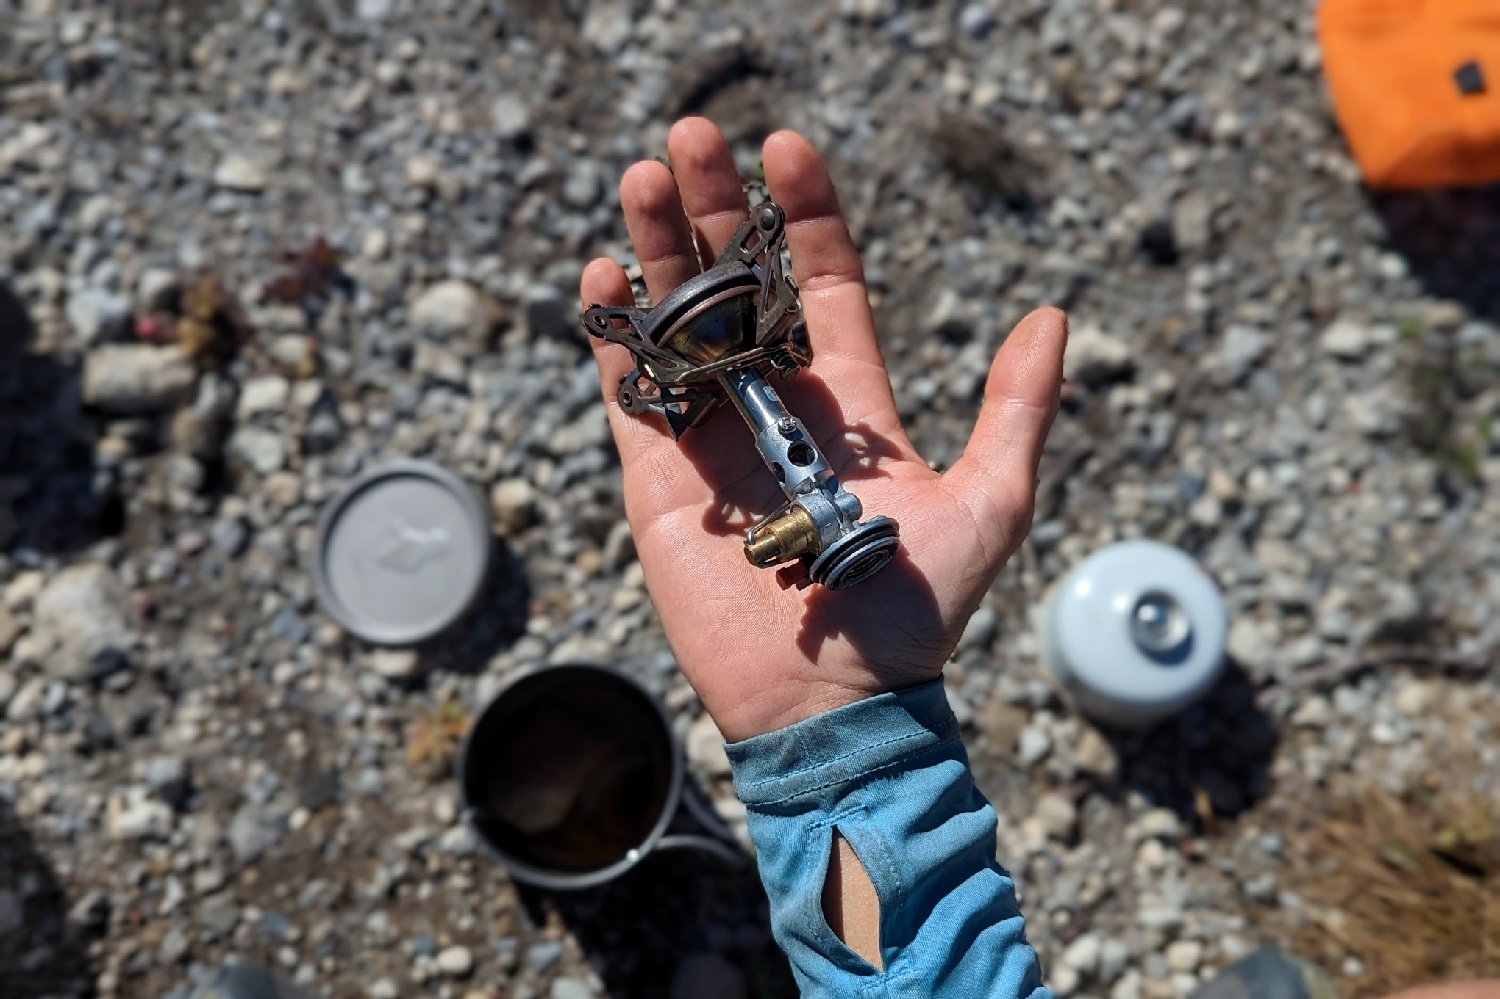 The SOTO Windmaster stove in a hikers hand to show the relative size - the stove is about the size of the hikers palm - there is some backpacking cookgear out of focus in the background on rocky ground